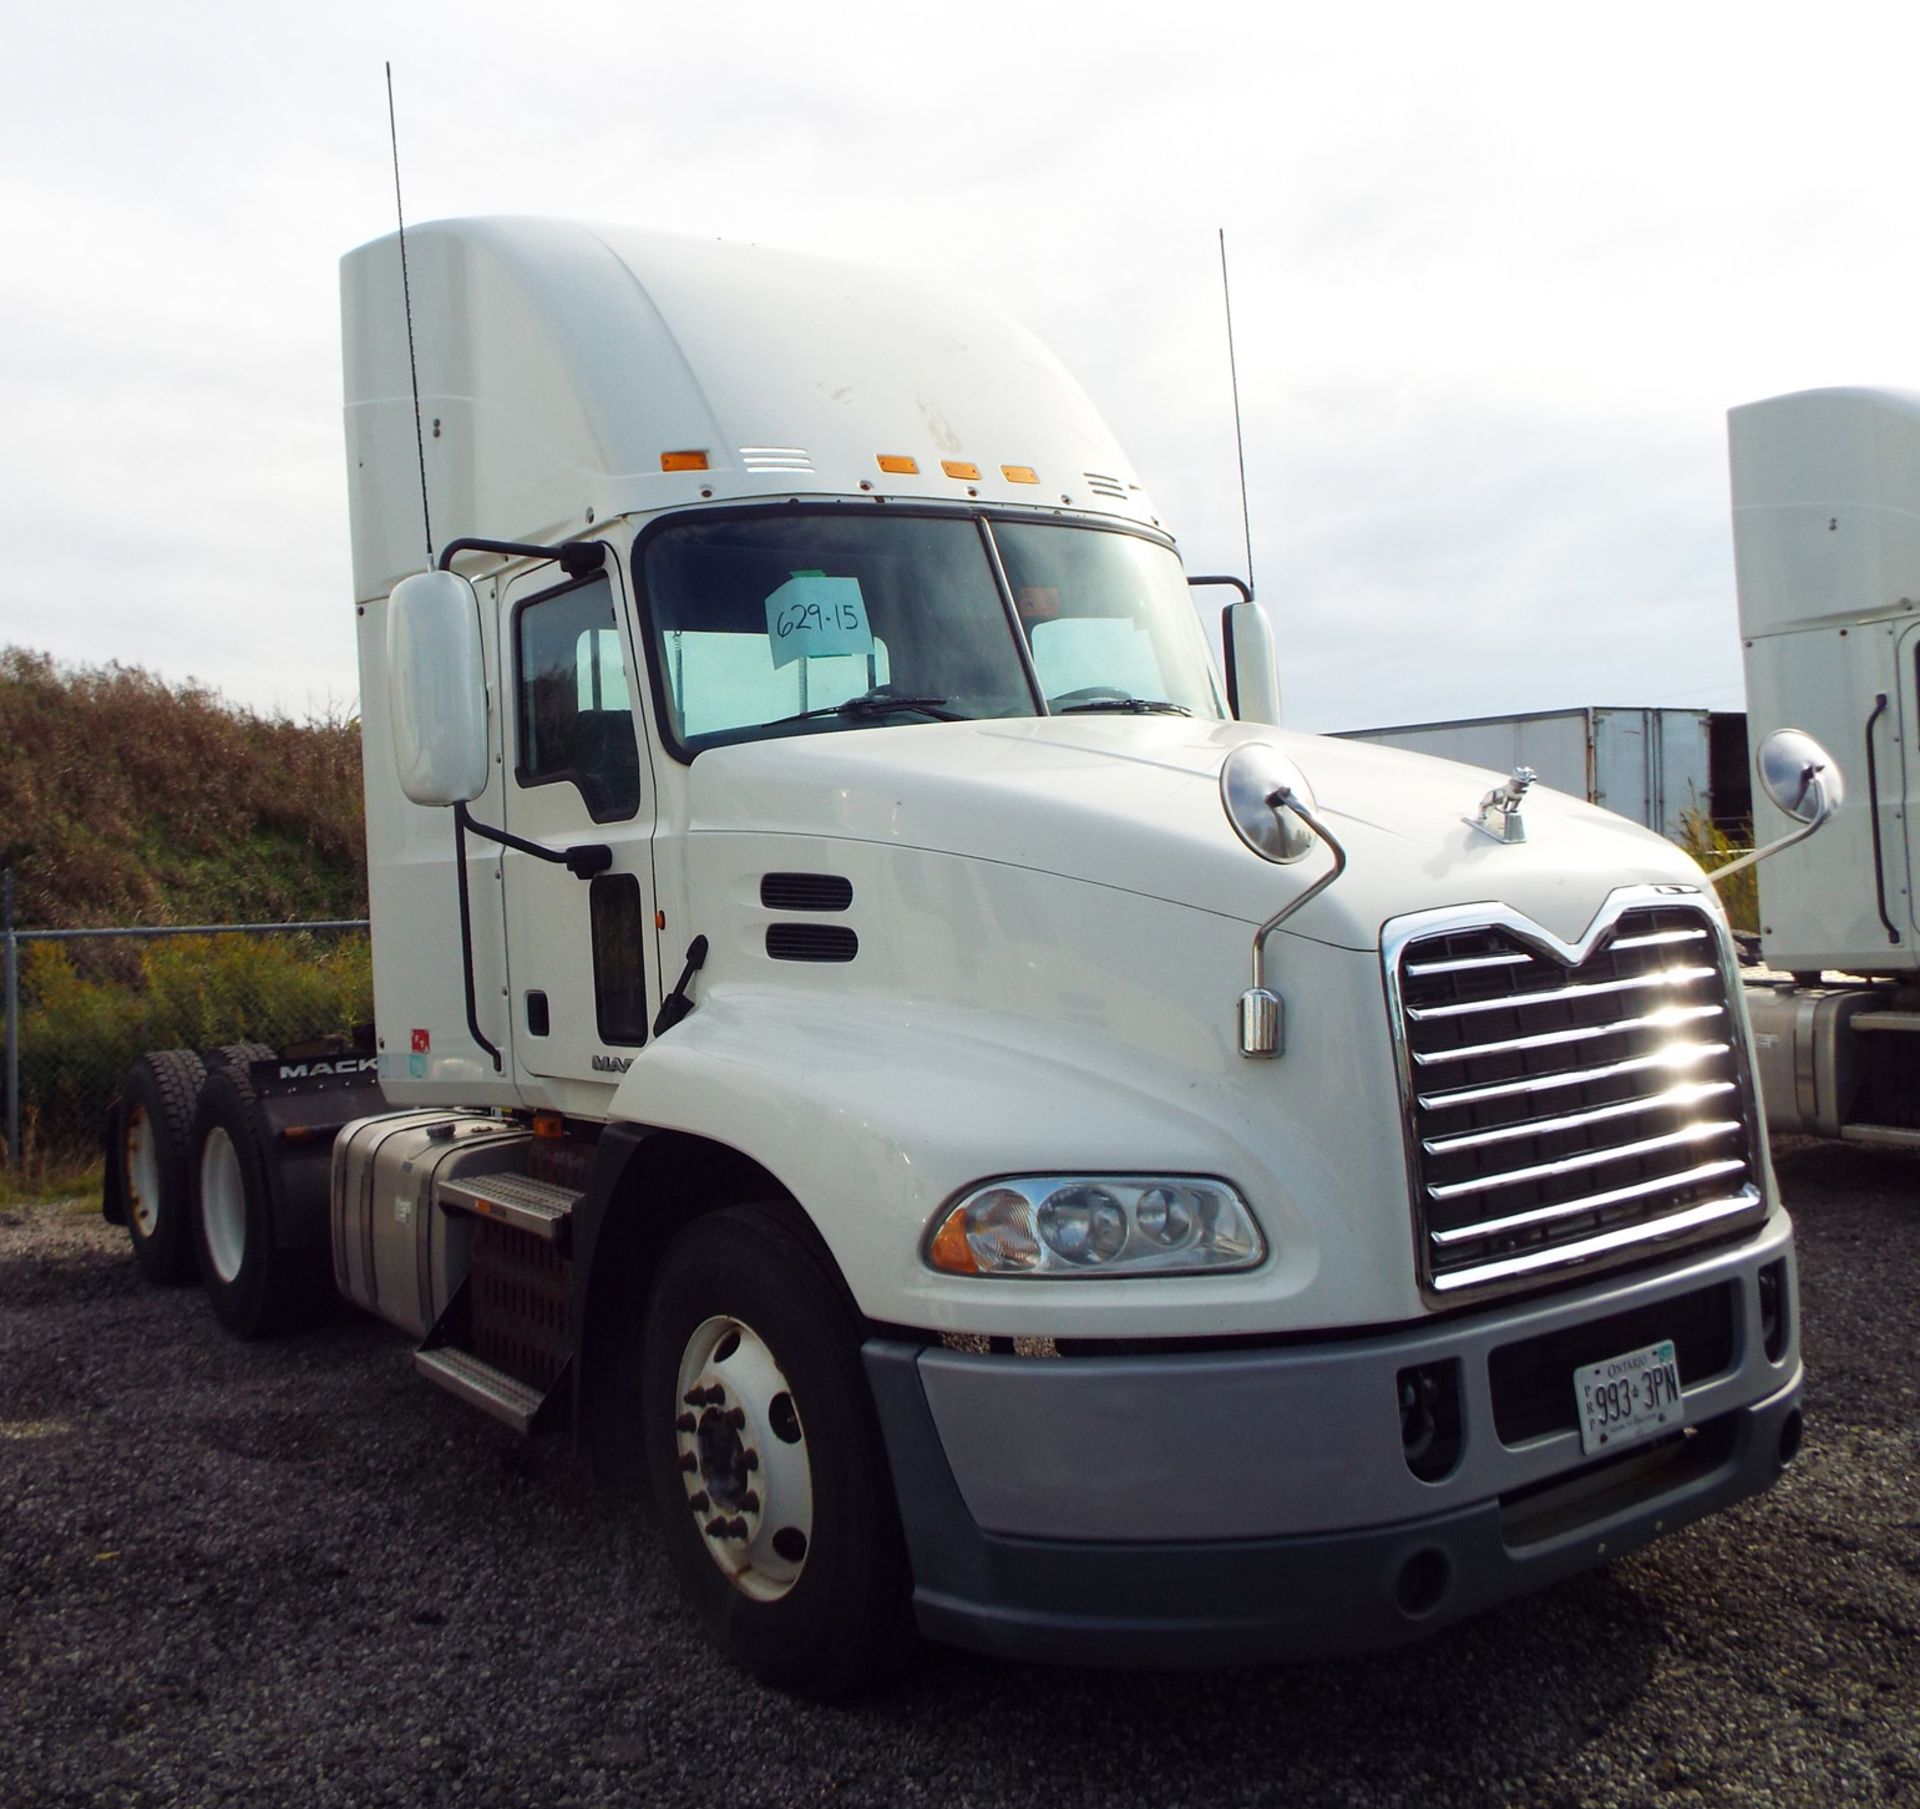 MACK (2015) CXU613 DAY CAB TRUCK WITH 405HP MP7 DIESEL ENGINE, 10 SPEED EATON FULLER TRANSMISSION, - Image 8 of 12